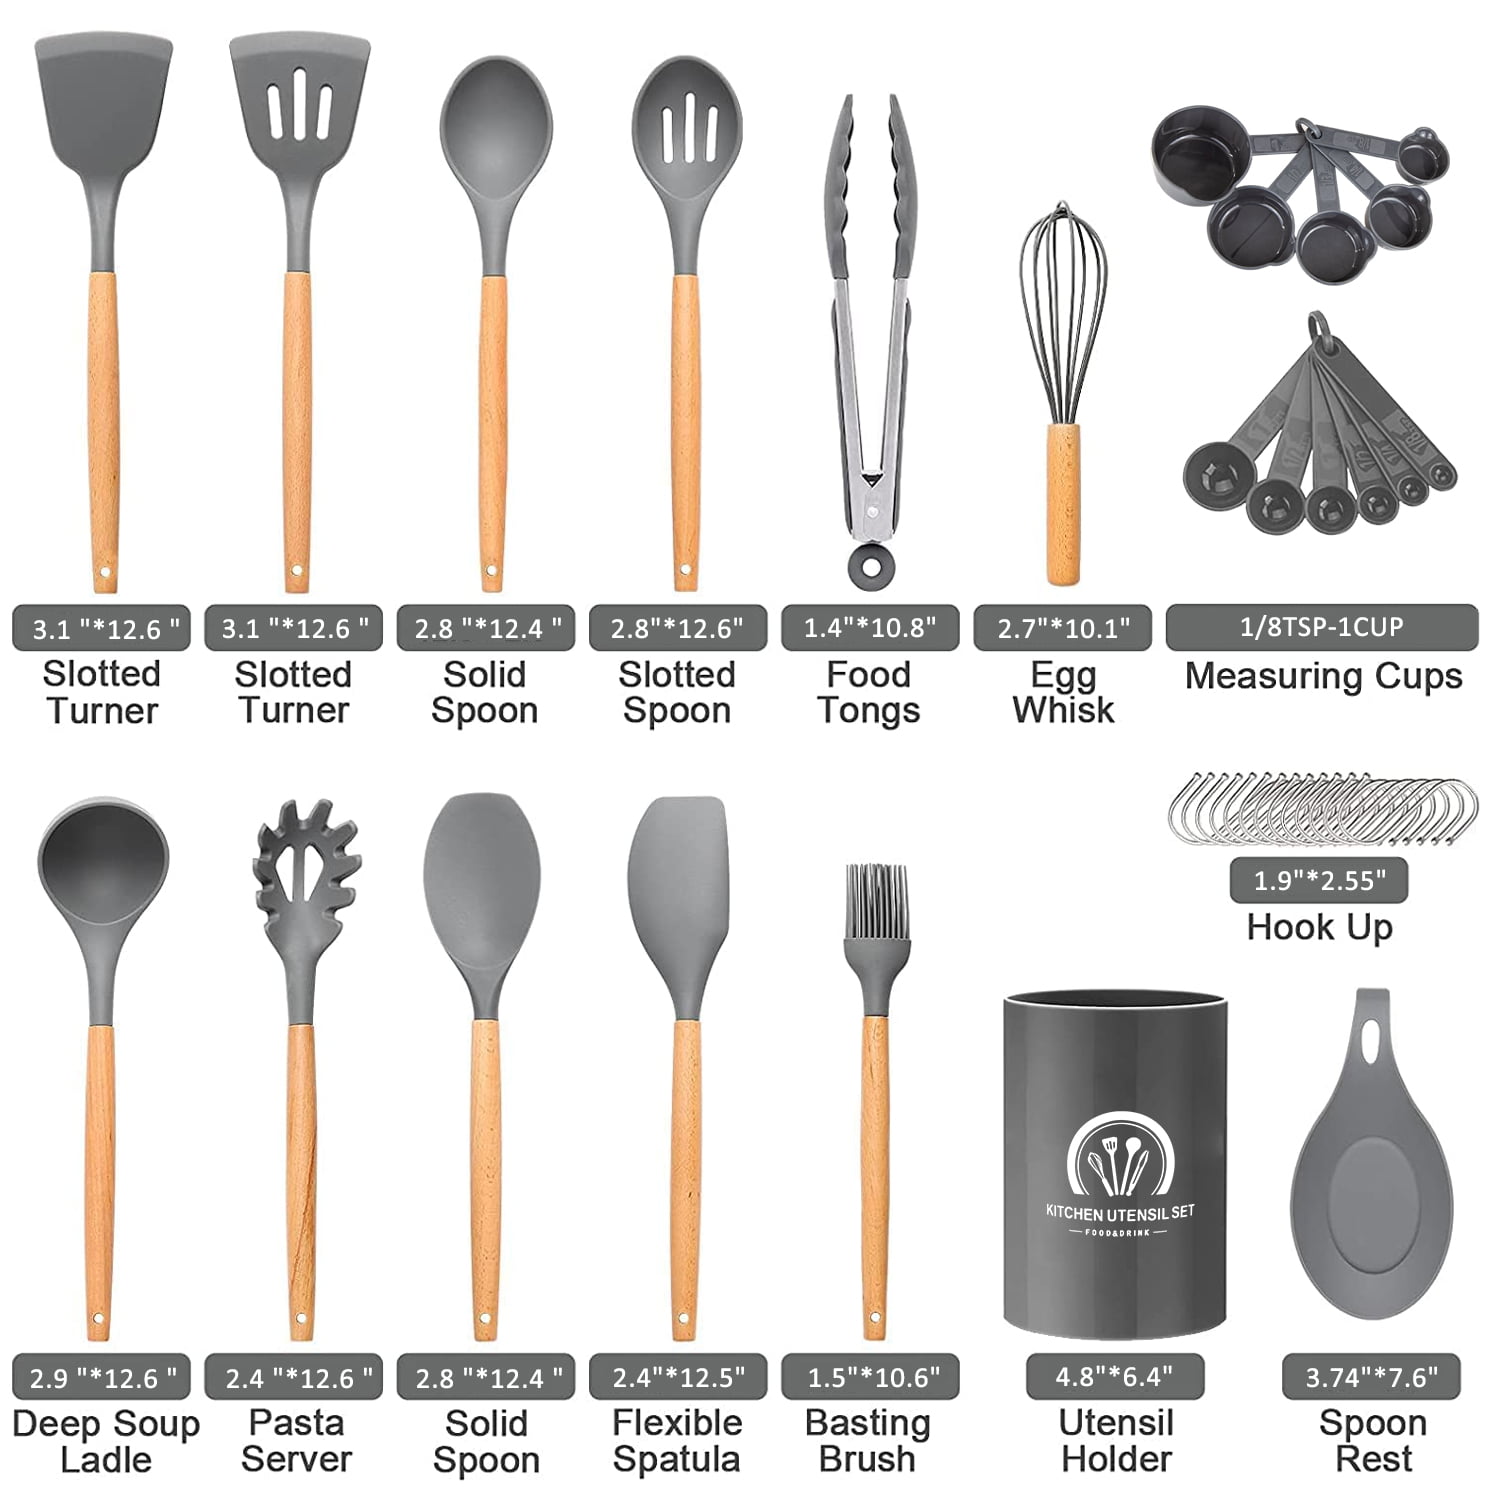 Silicone Cooking Utensils Set Including 446°f Heat Resistant Silicone  Cooking Tools, Kitchen Utensil Spatula Set With Wooden Handle And Holder,  Small Tools That Are Suitable For Non-stick Cookware